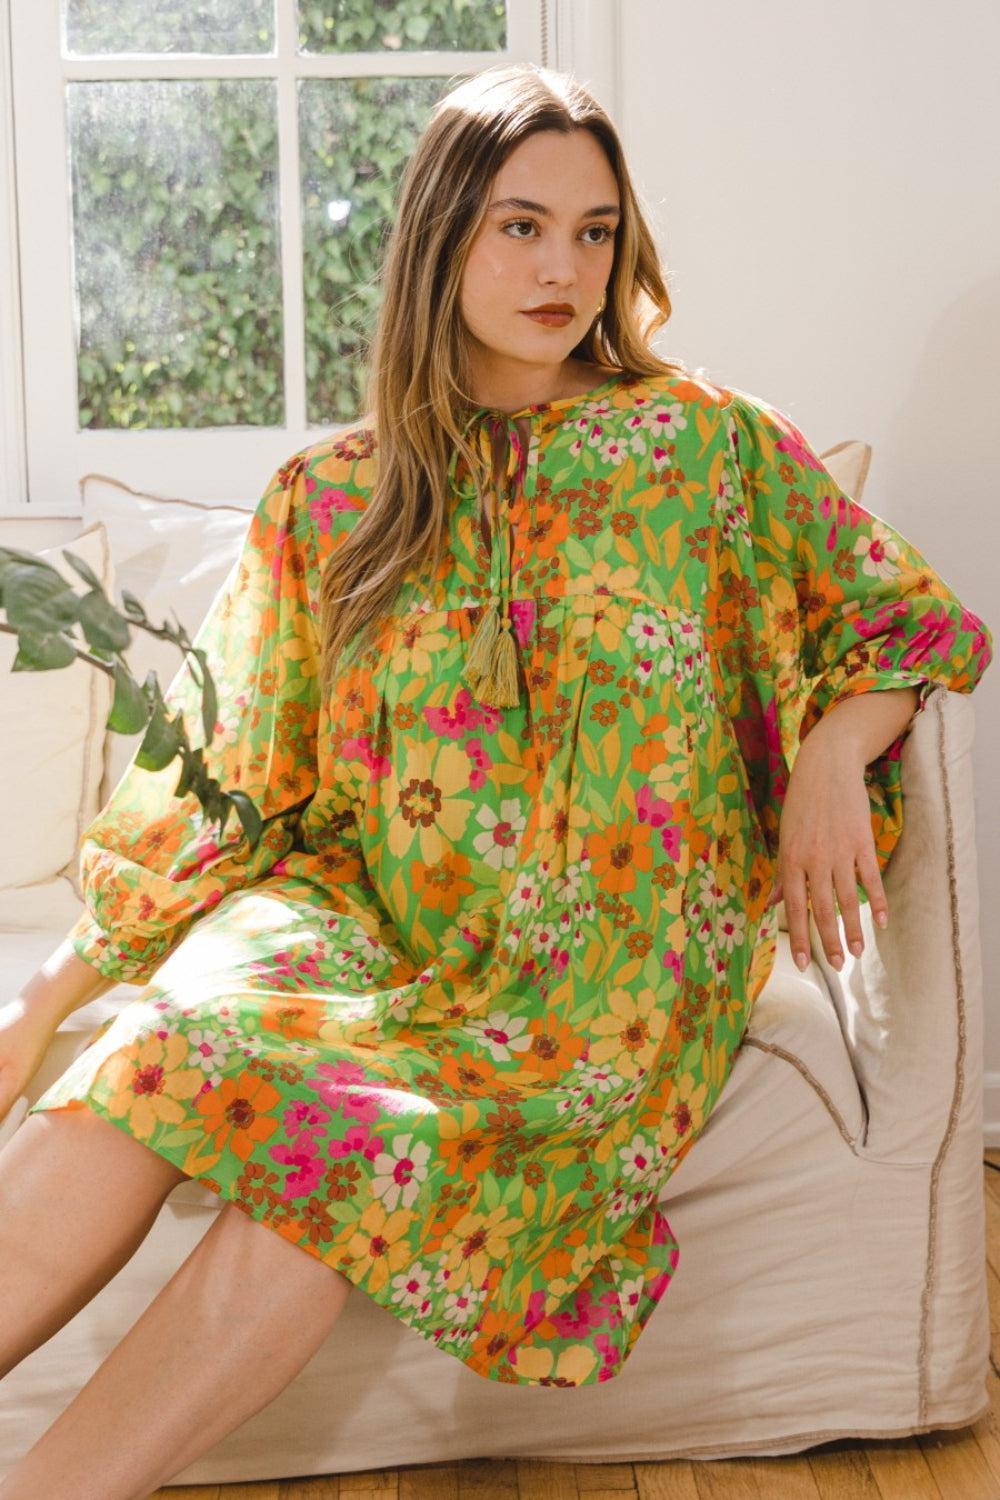 a woman sitting on a couch wearing a green floral dress